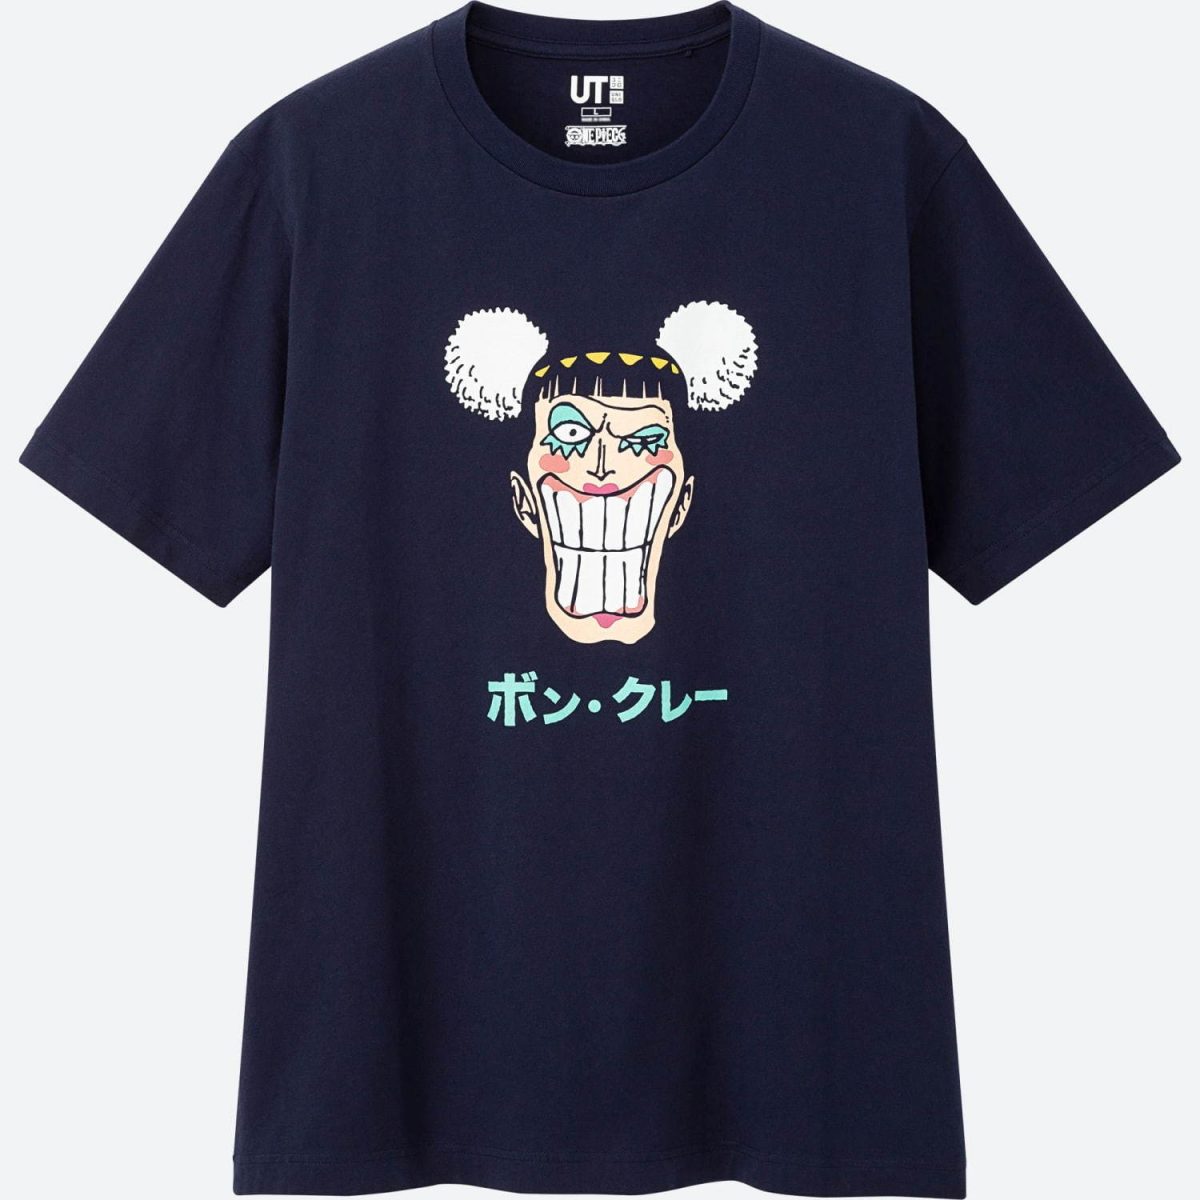 Uniqlo x One Piece UT Collection now available in Singapore ...